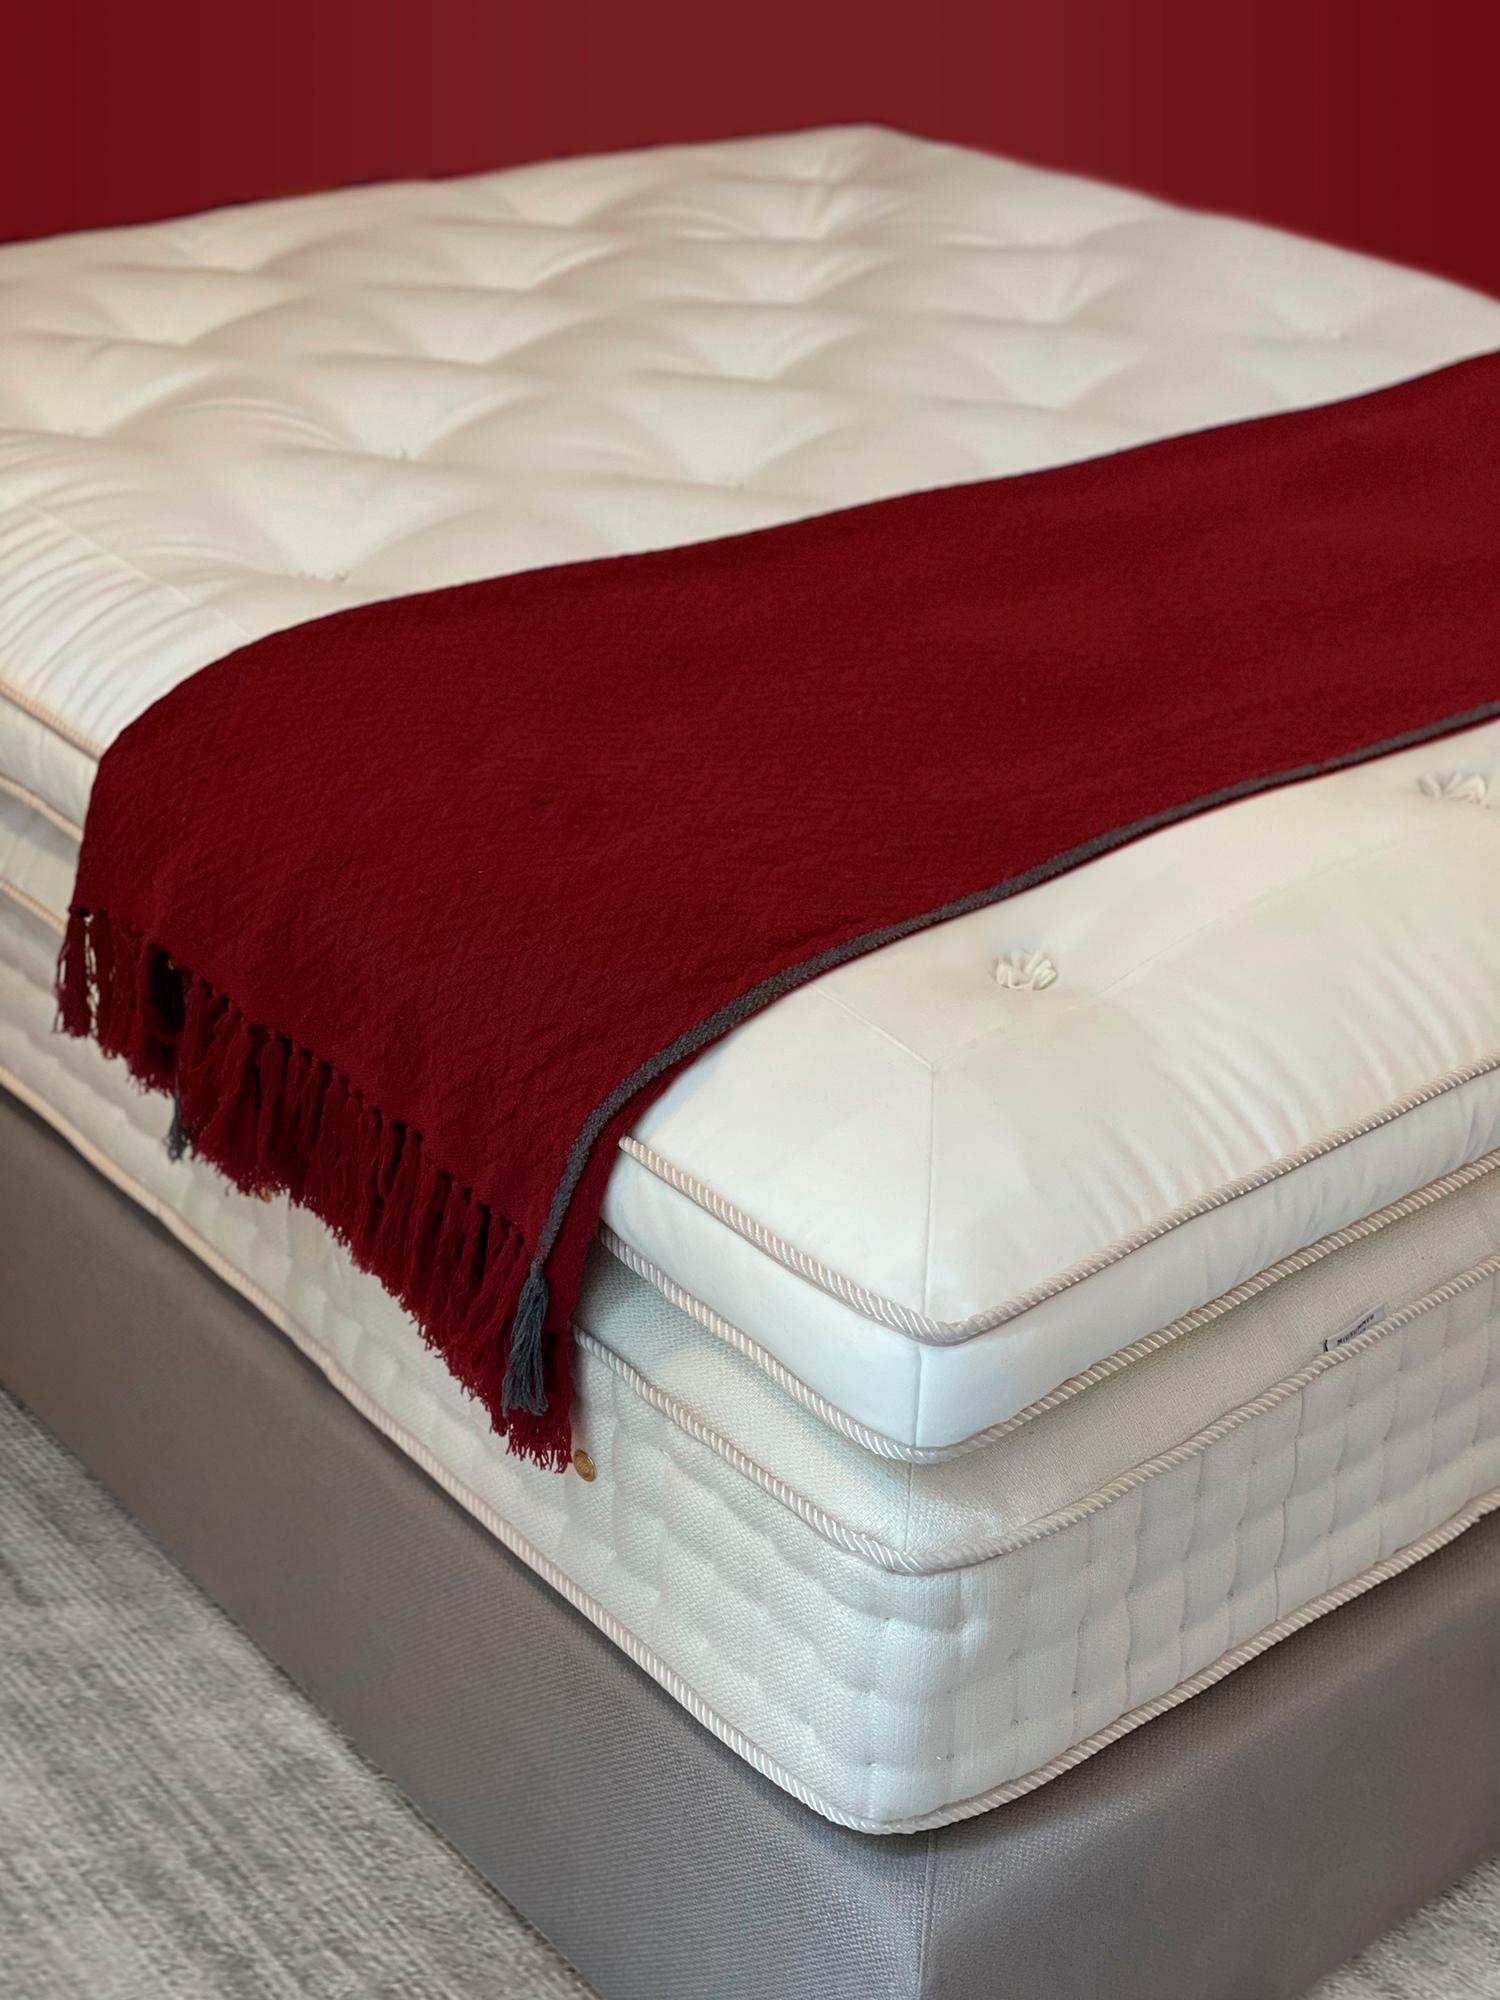 The Roma mattress is upholstered with the wonderful “Mystic river” fabric by Loro Piana Interiors. Padding for the winter side: silk, Falkland wool and horsehair. Padding for the summer side: linen/IngeoTM, cotton, Falkland wool and horsehair. H25,